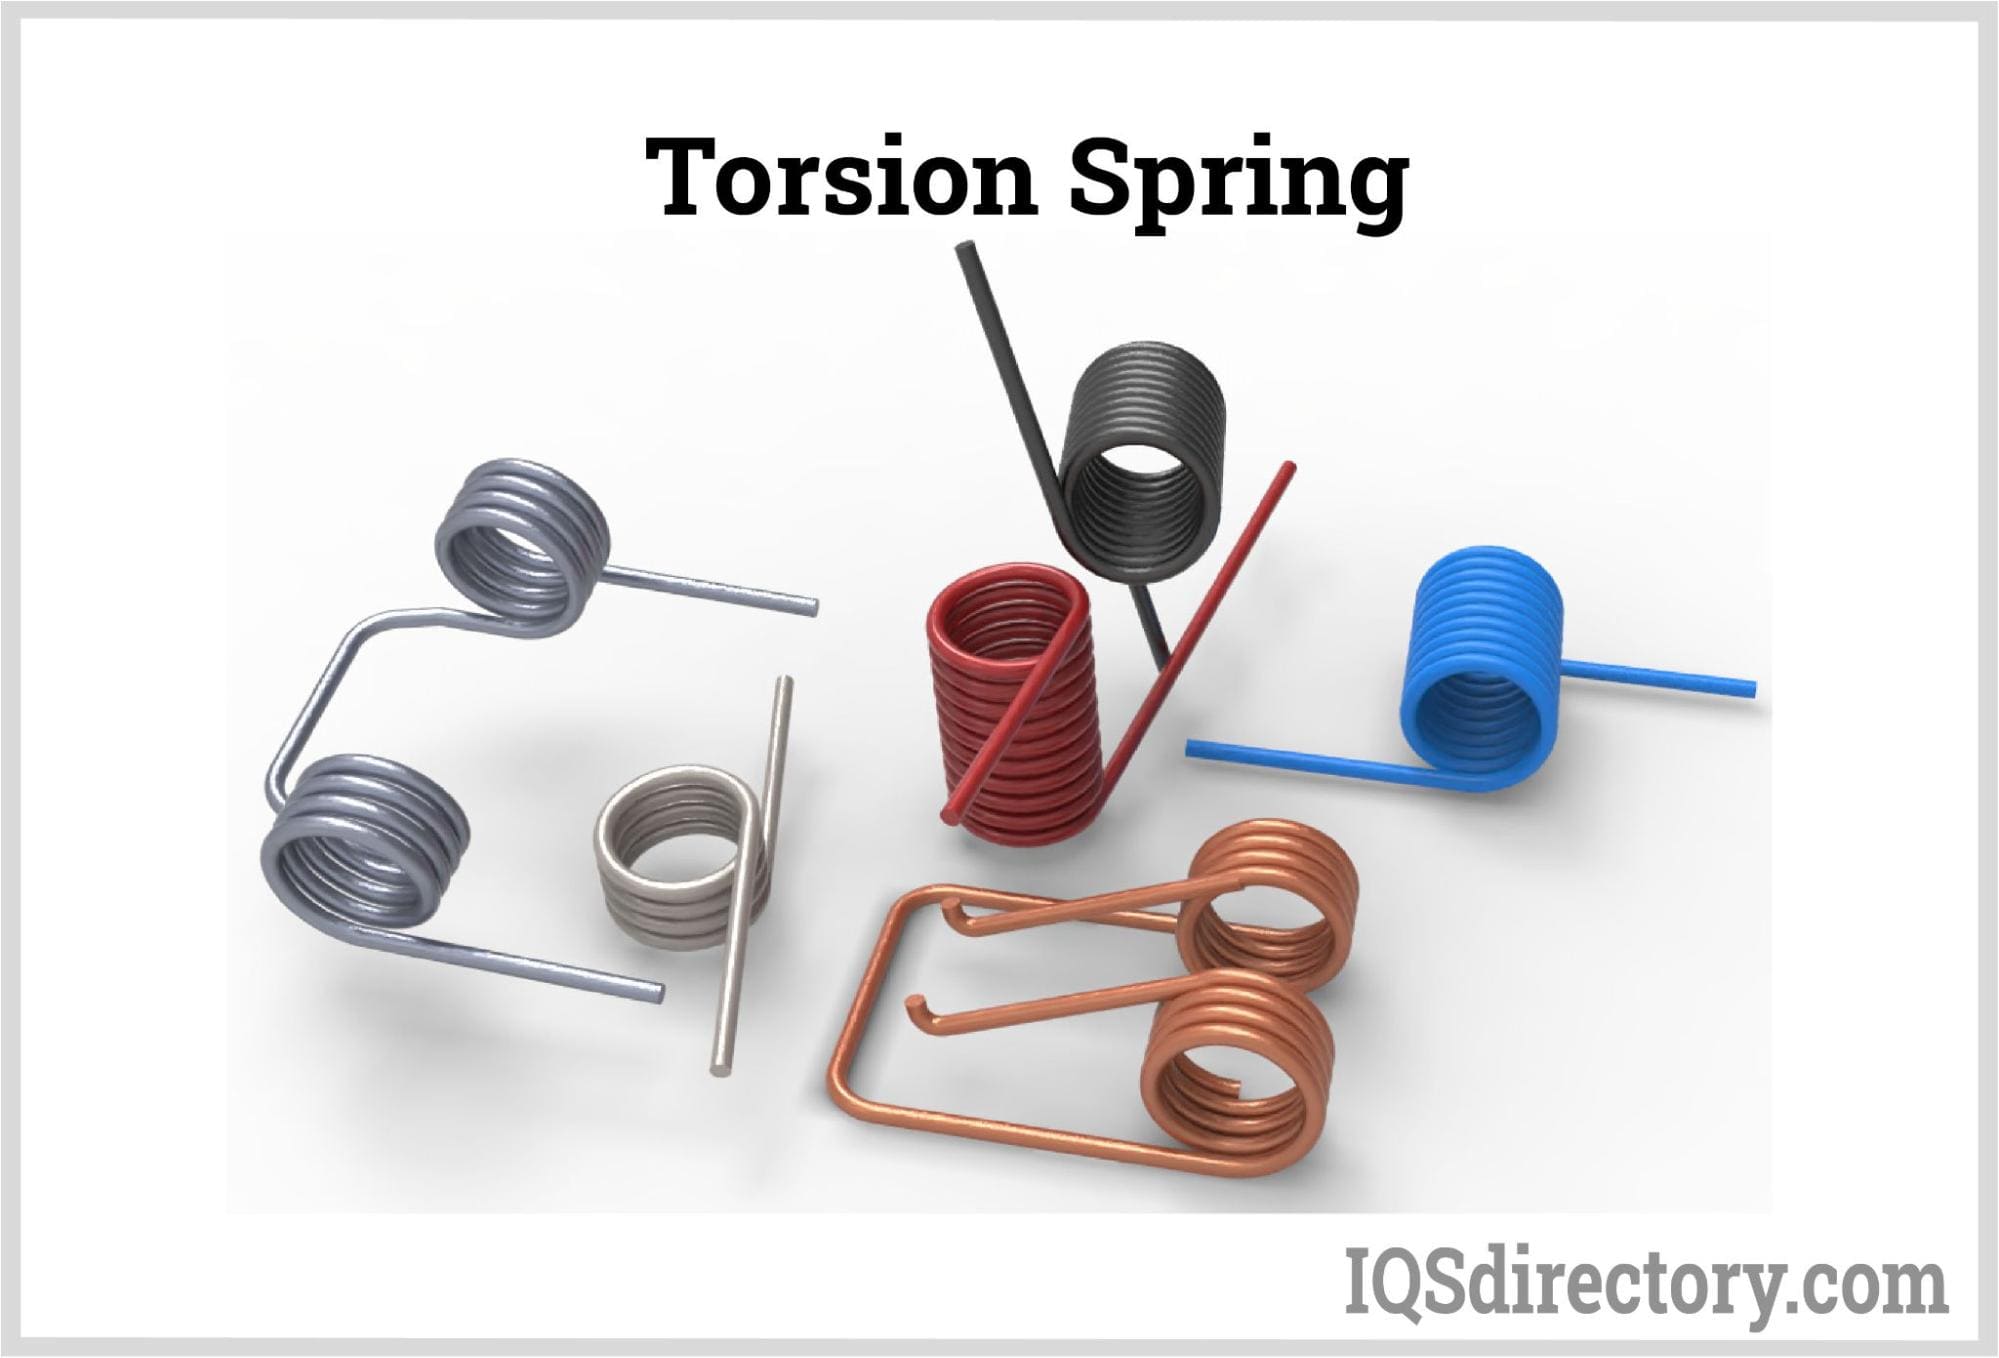 Manufacturing of a Music Wire Torsion Spring